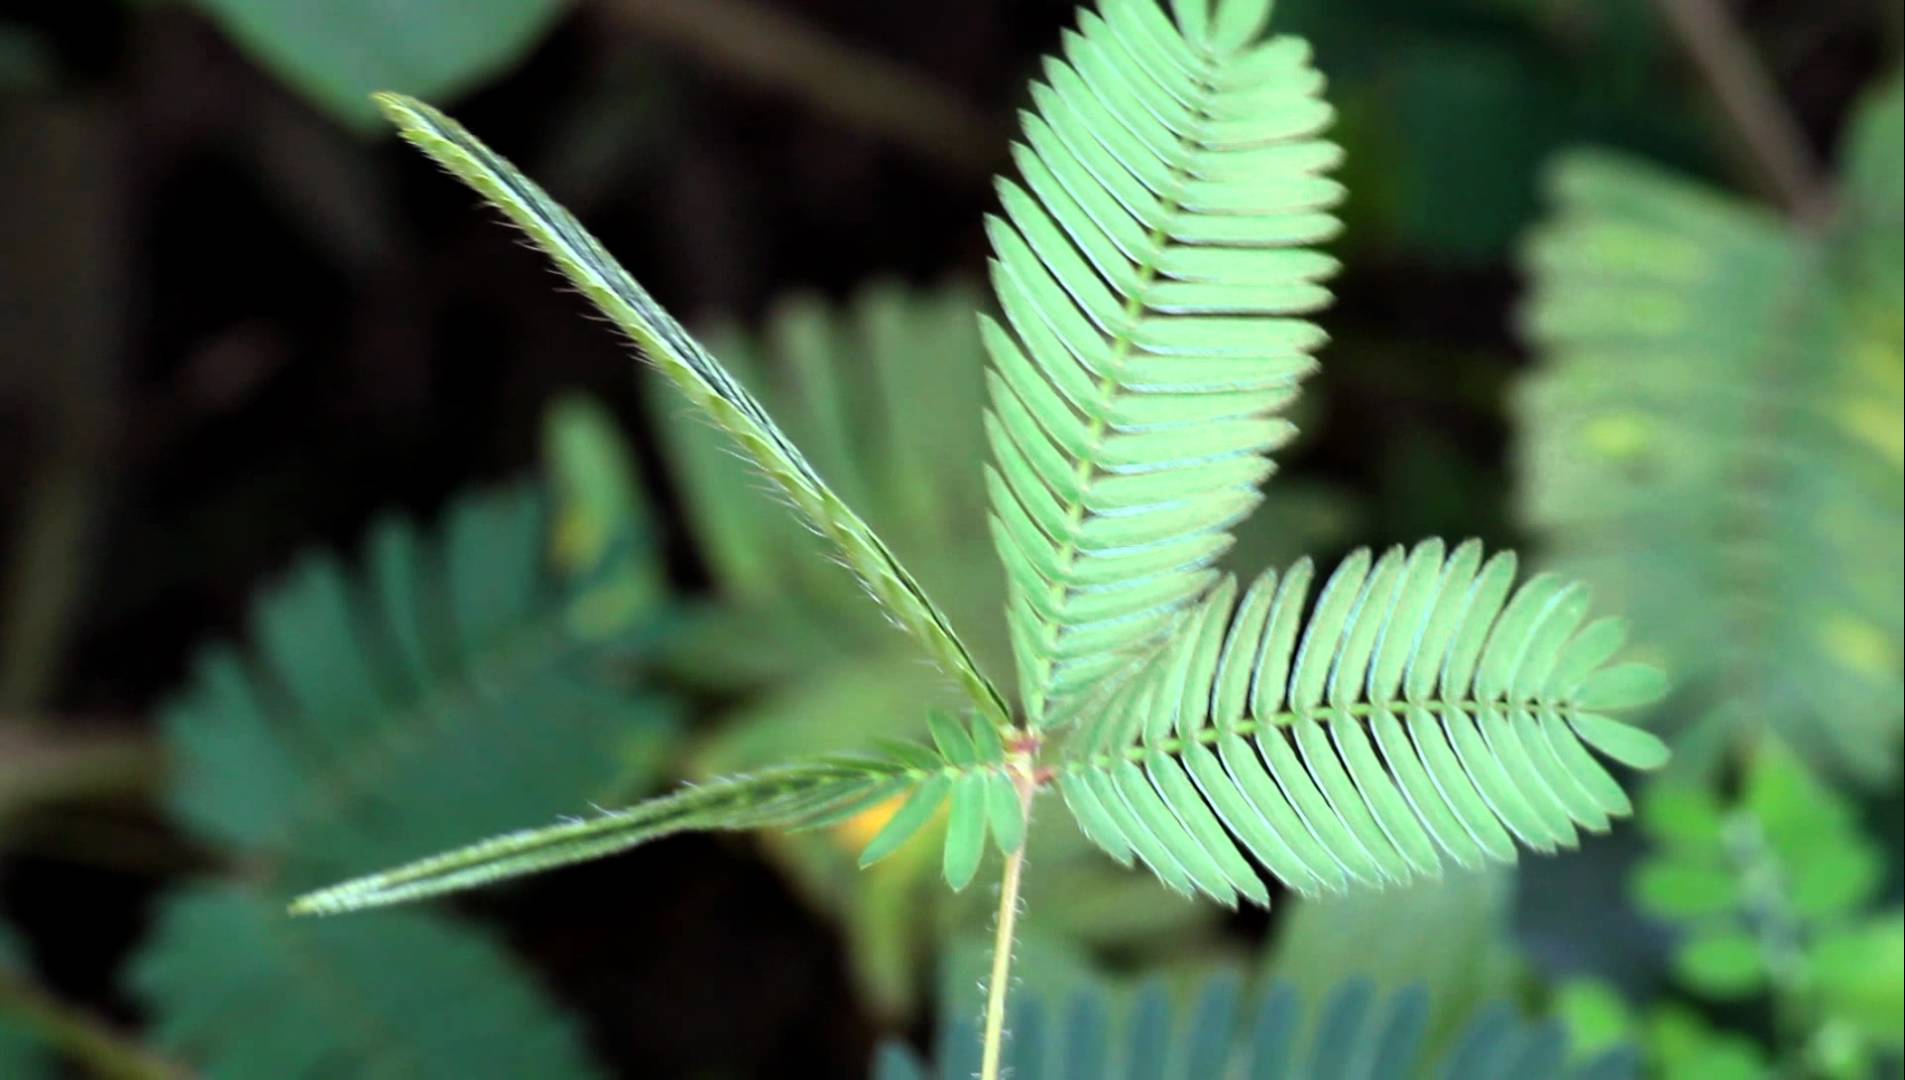 Touch-me-not plant/sensitive plant (mimosa pudica) leaves in action ...